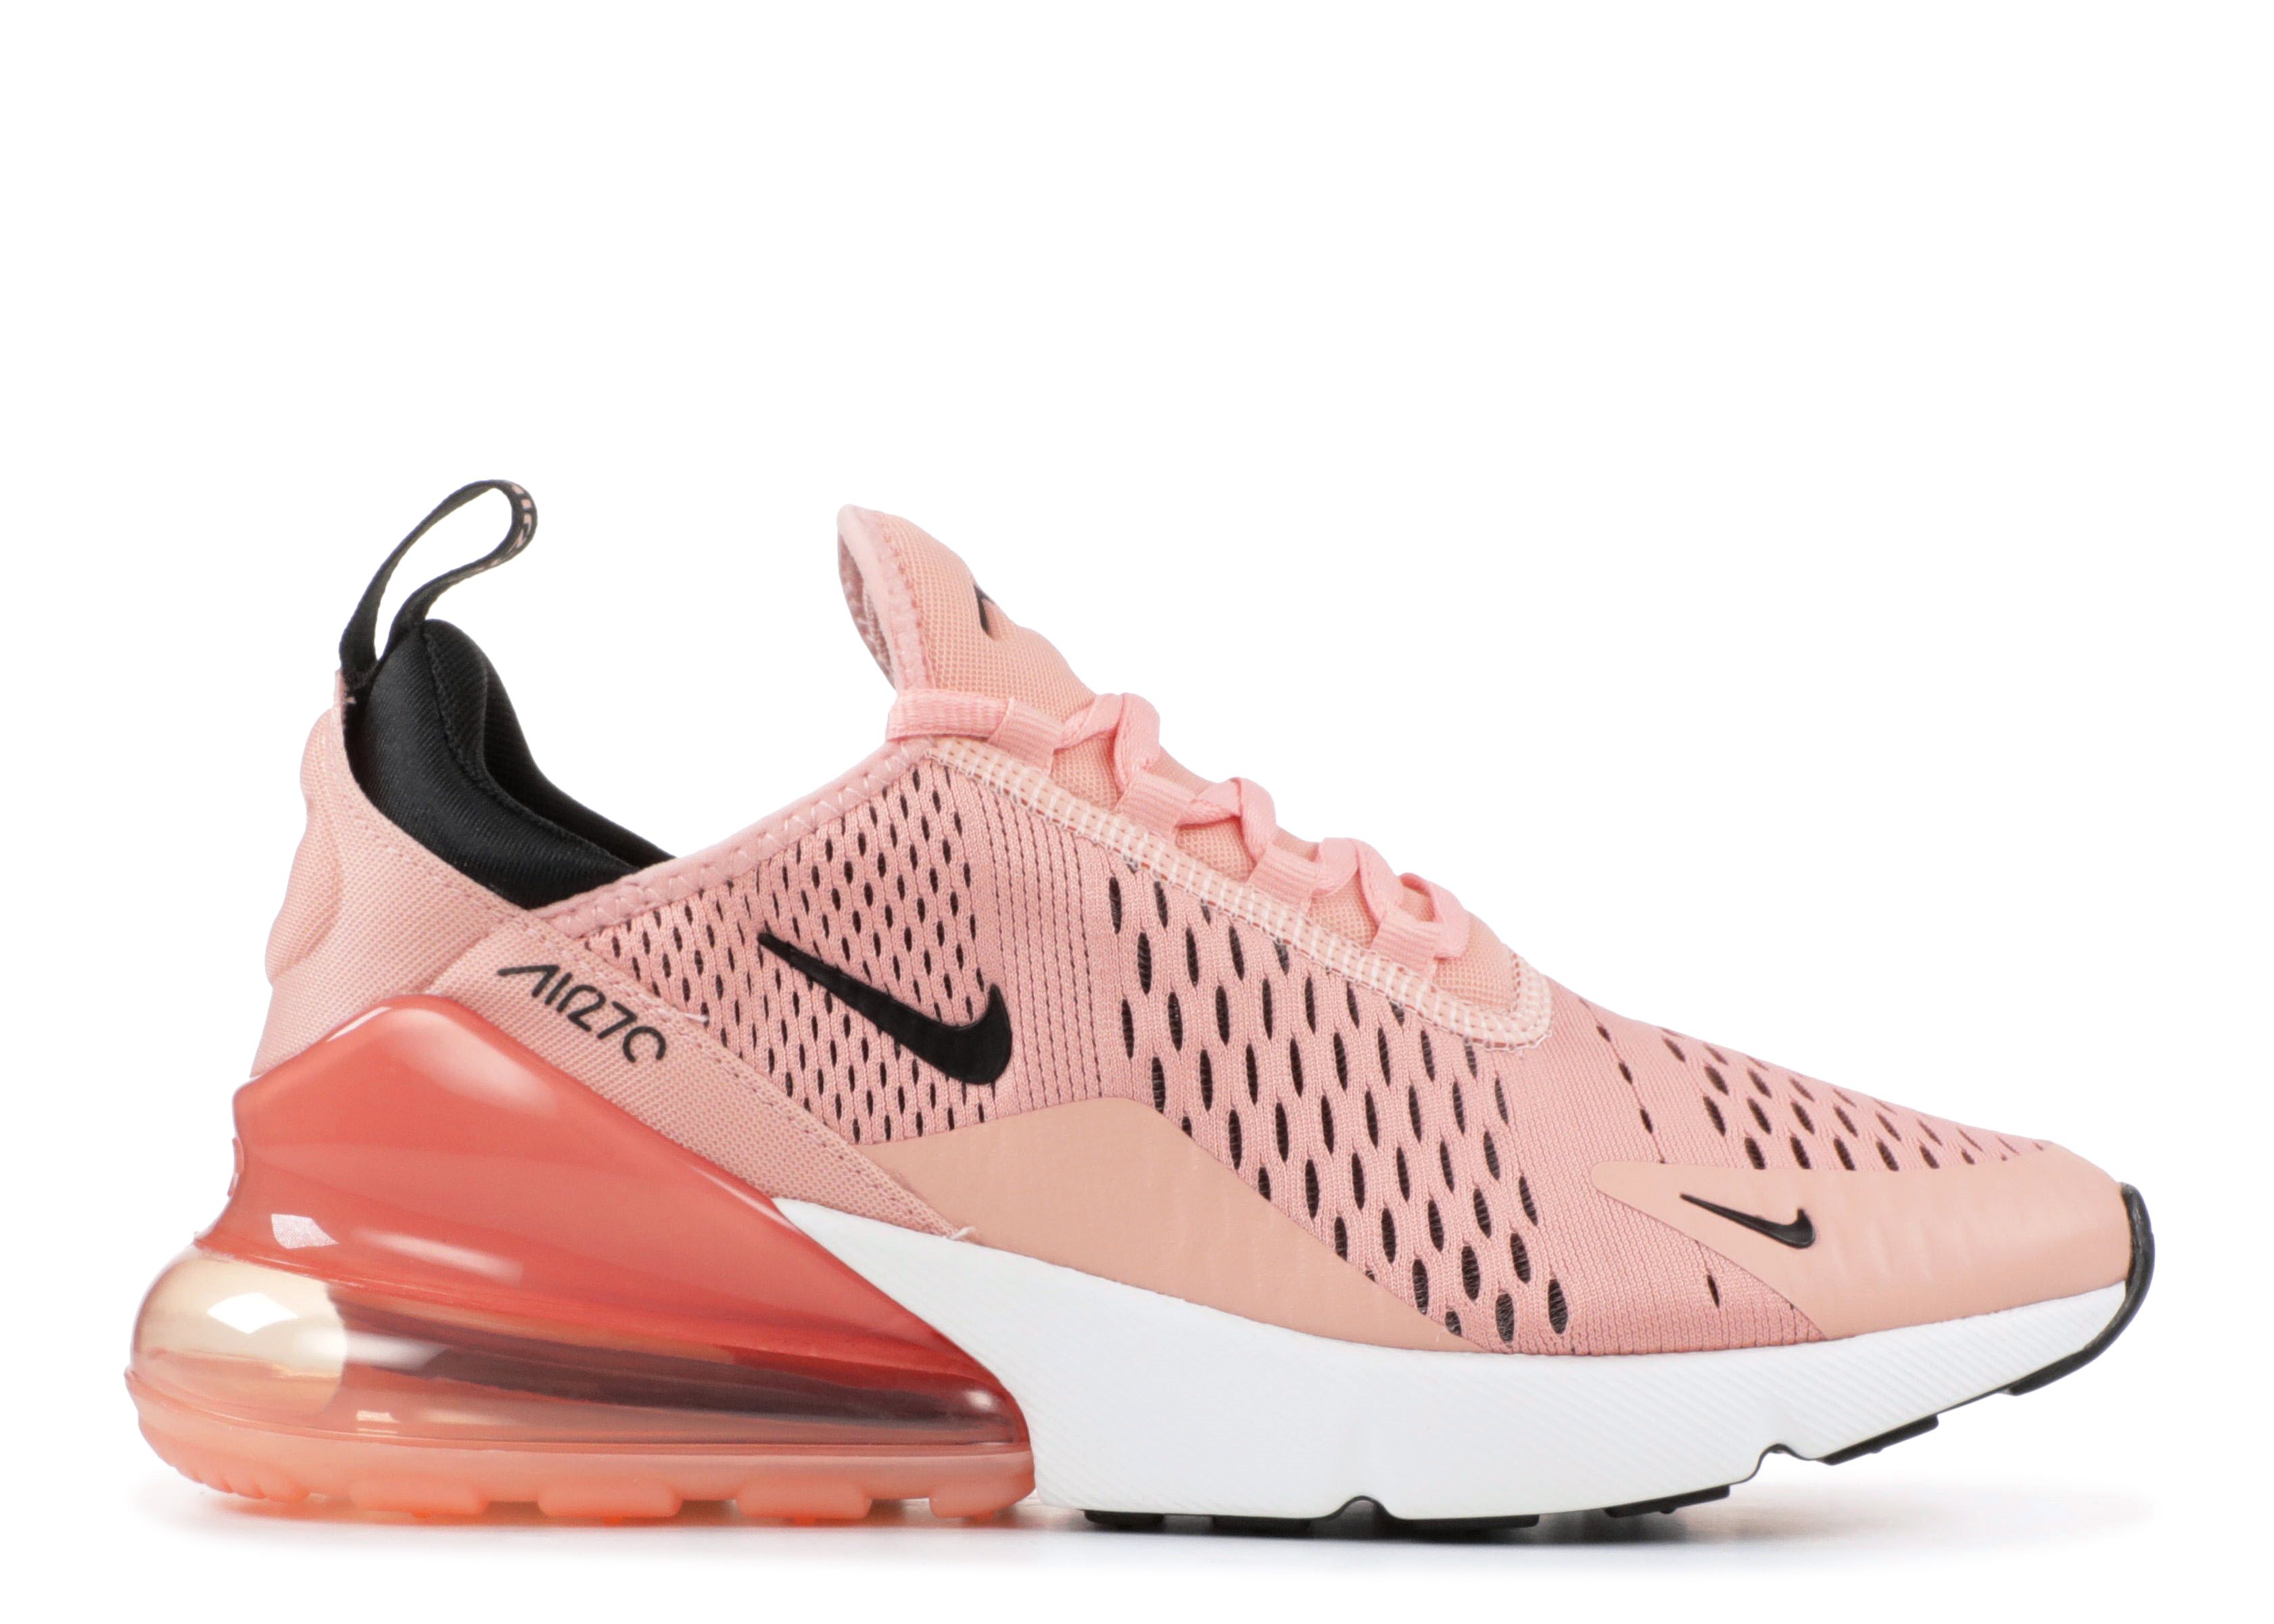 pink 270s